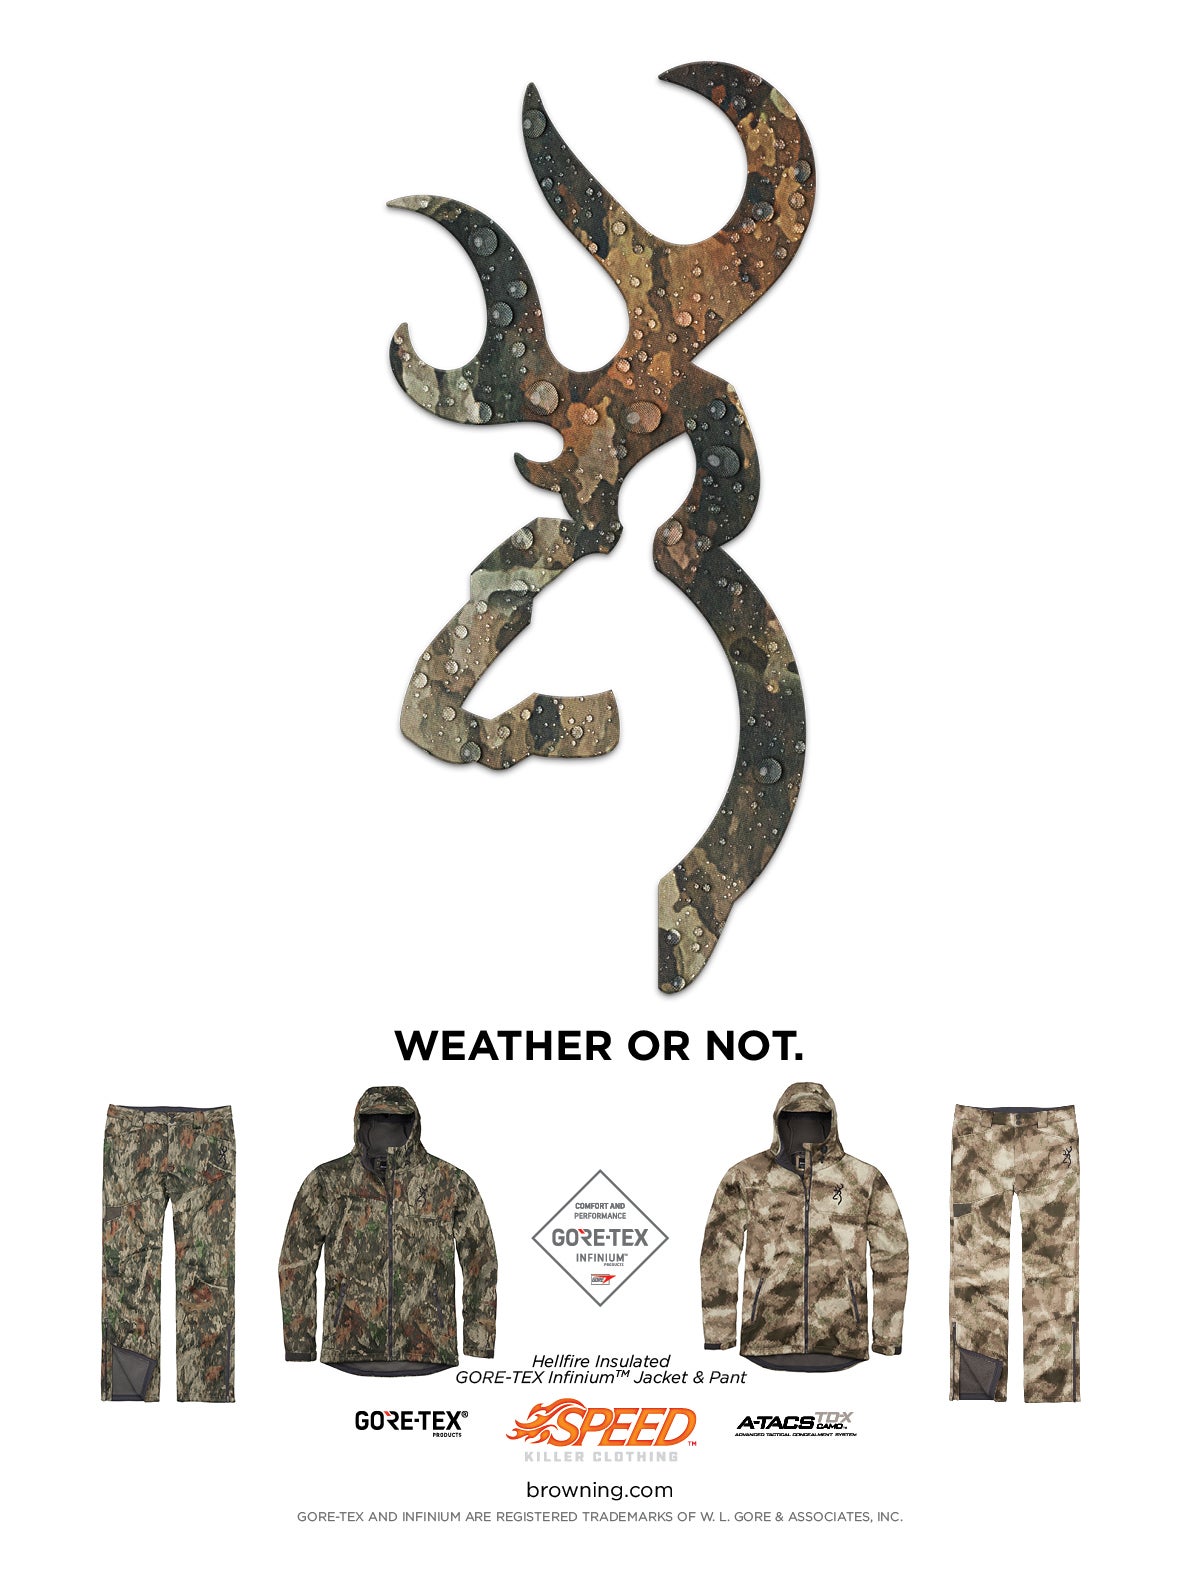 Big Game Clothing Ad, Weather or Not